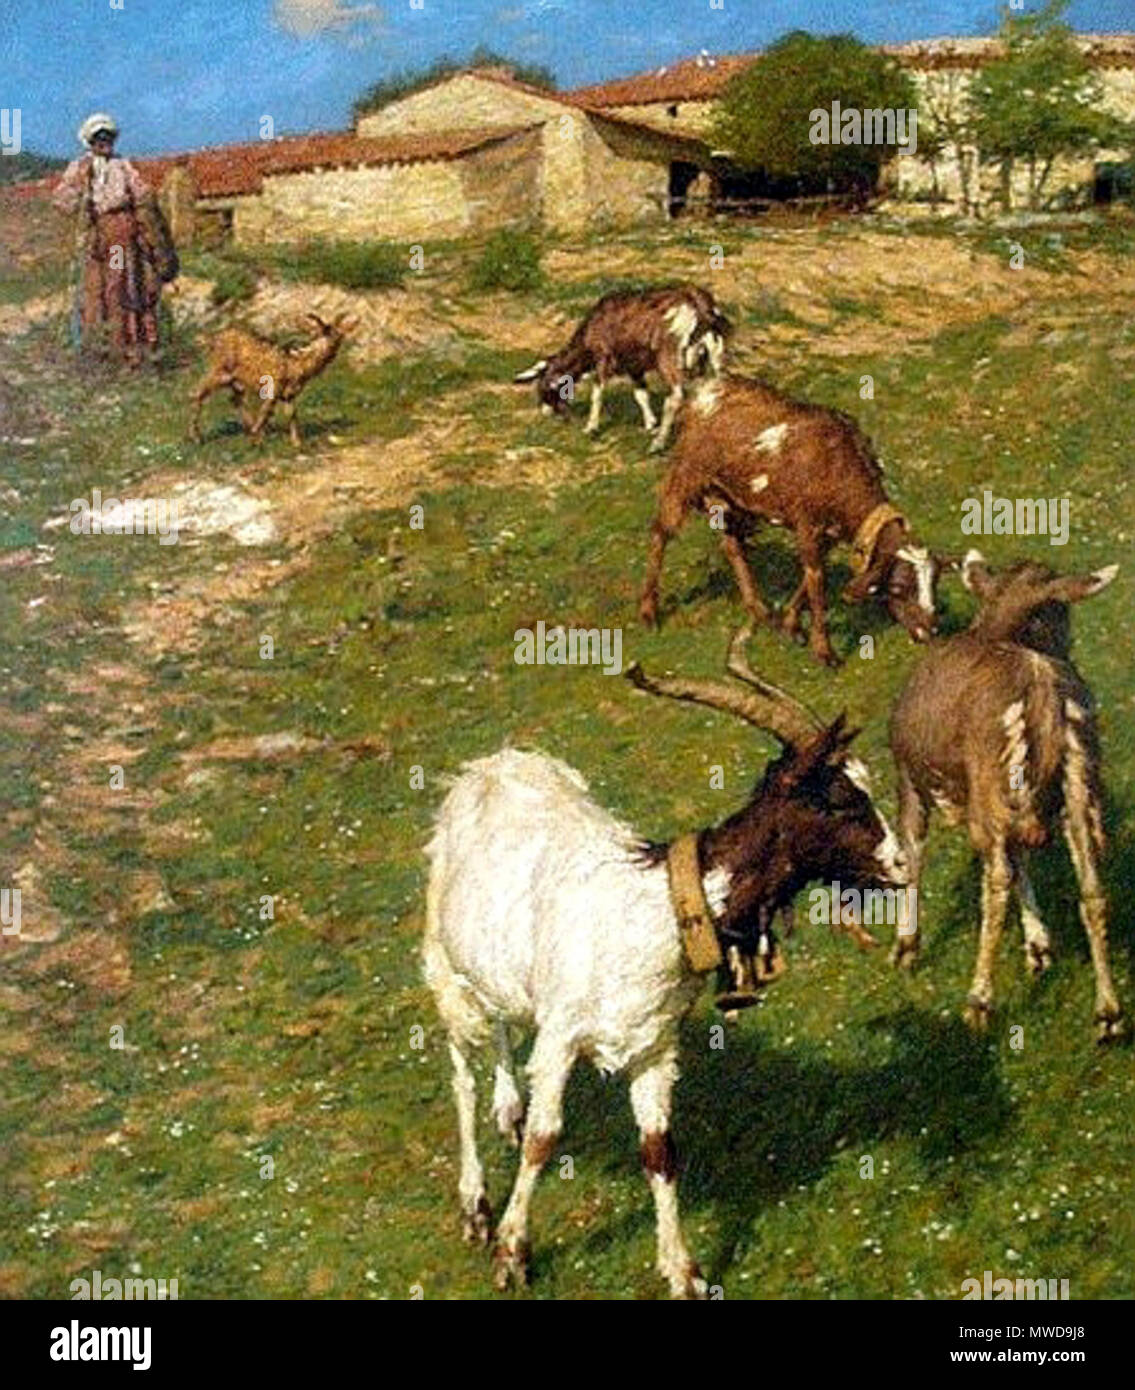 . Provencal Farm . Unknown date.    Henry Herbert La Thangue  (1859–1929)     Alternative names Henry Herbert LaThangue; Henry La Thangue; Henry Herbert la Thangue; Henry Herbert Lathangue; La Thangue  Description English painter Realist painter and associated with the Newlyn School  Date of birth/death 19 September 1859 21 December 1929  Location of birth/death London London  Work location Bretagne, London, Category:Norfolk  Authority control  : Q1606851 VIAF: 25469415 ISNI: 0000 0000 6681 1384 ULAN: 500004645 LCCN: n89654016 WGA: LA THANGUE, Henry Herbert WorldCat 273 Henry Herbert La Thangu Stock Photo